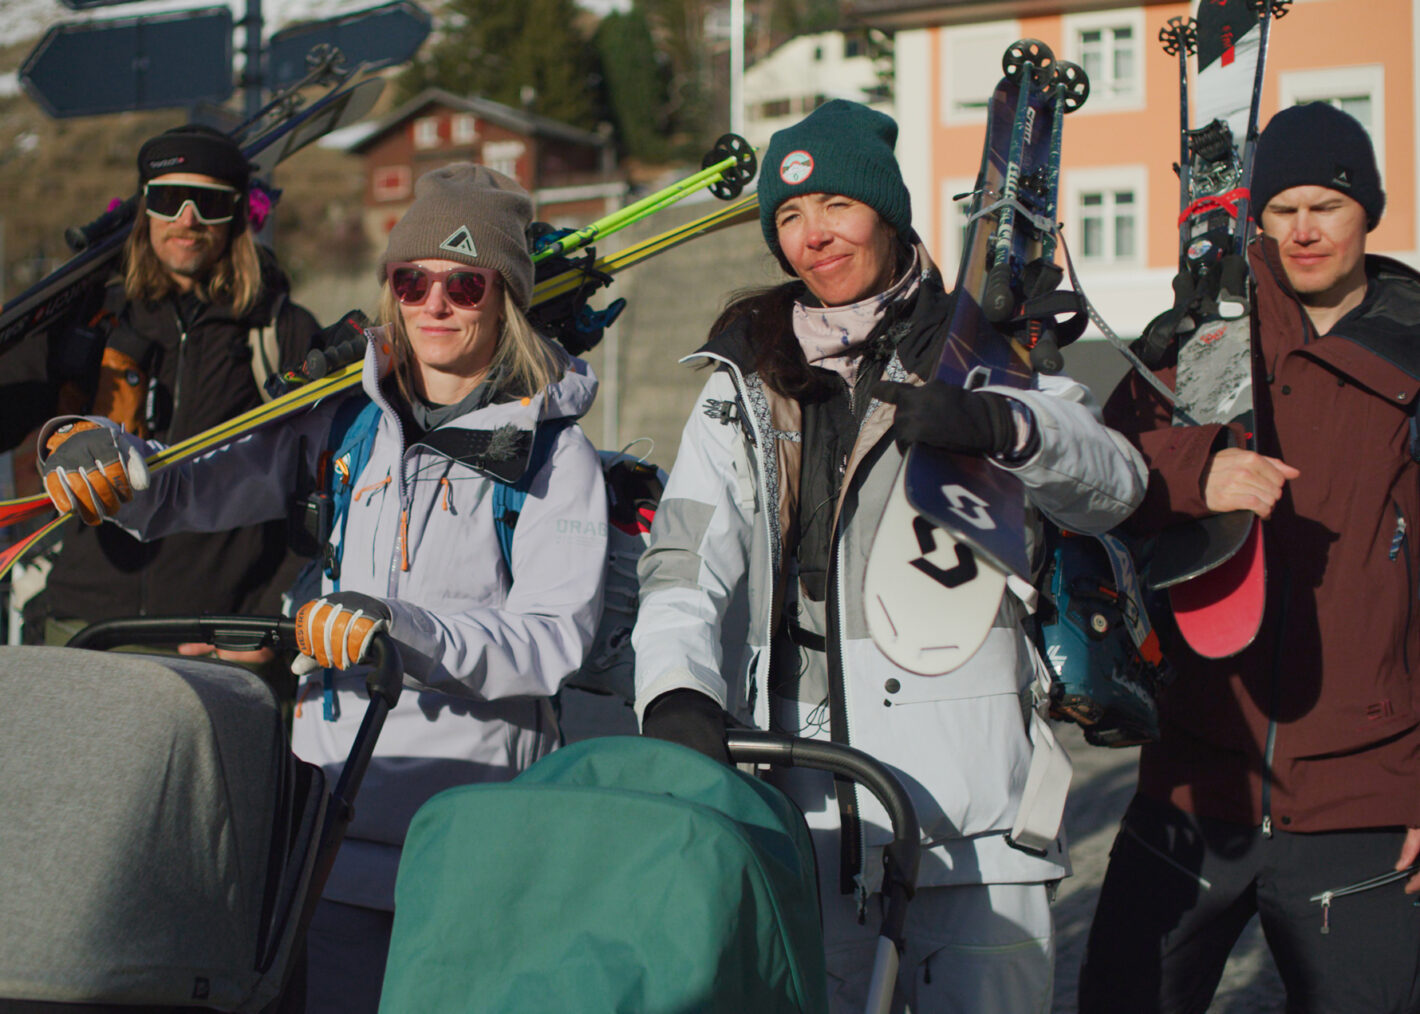 Elyse and three others walking in a parking lot with skis on their shoulders and gear on